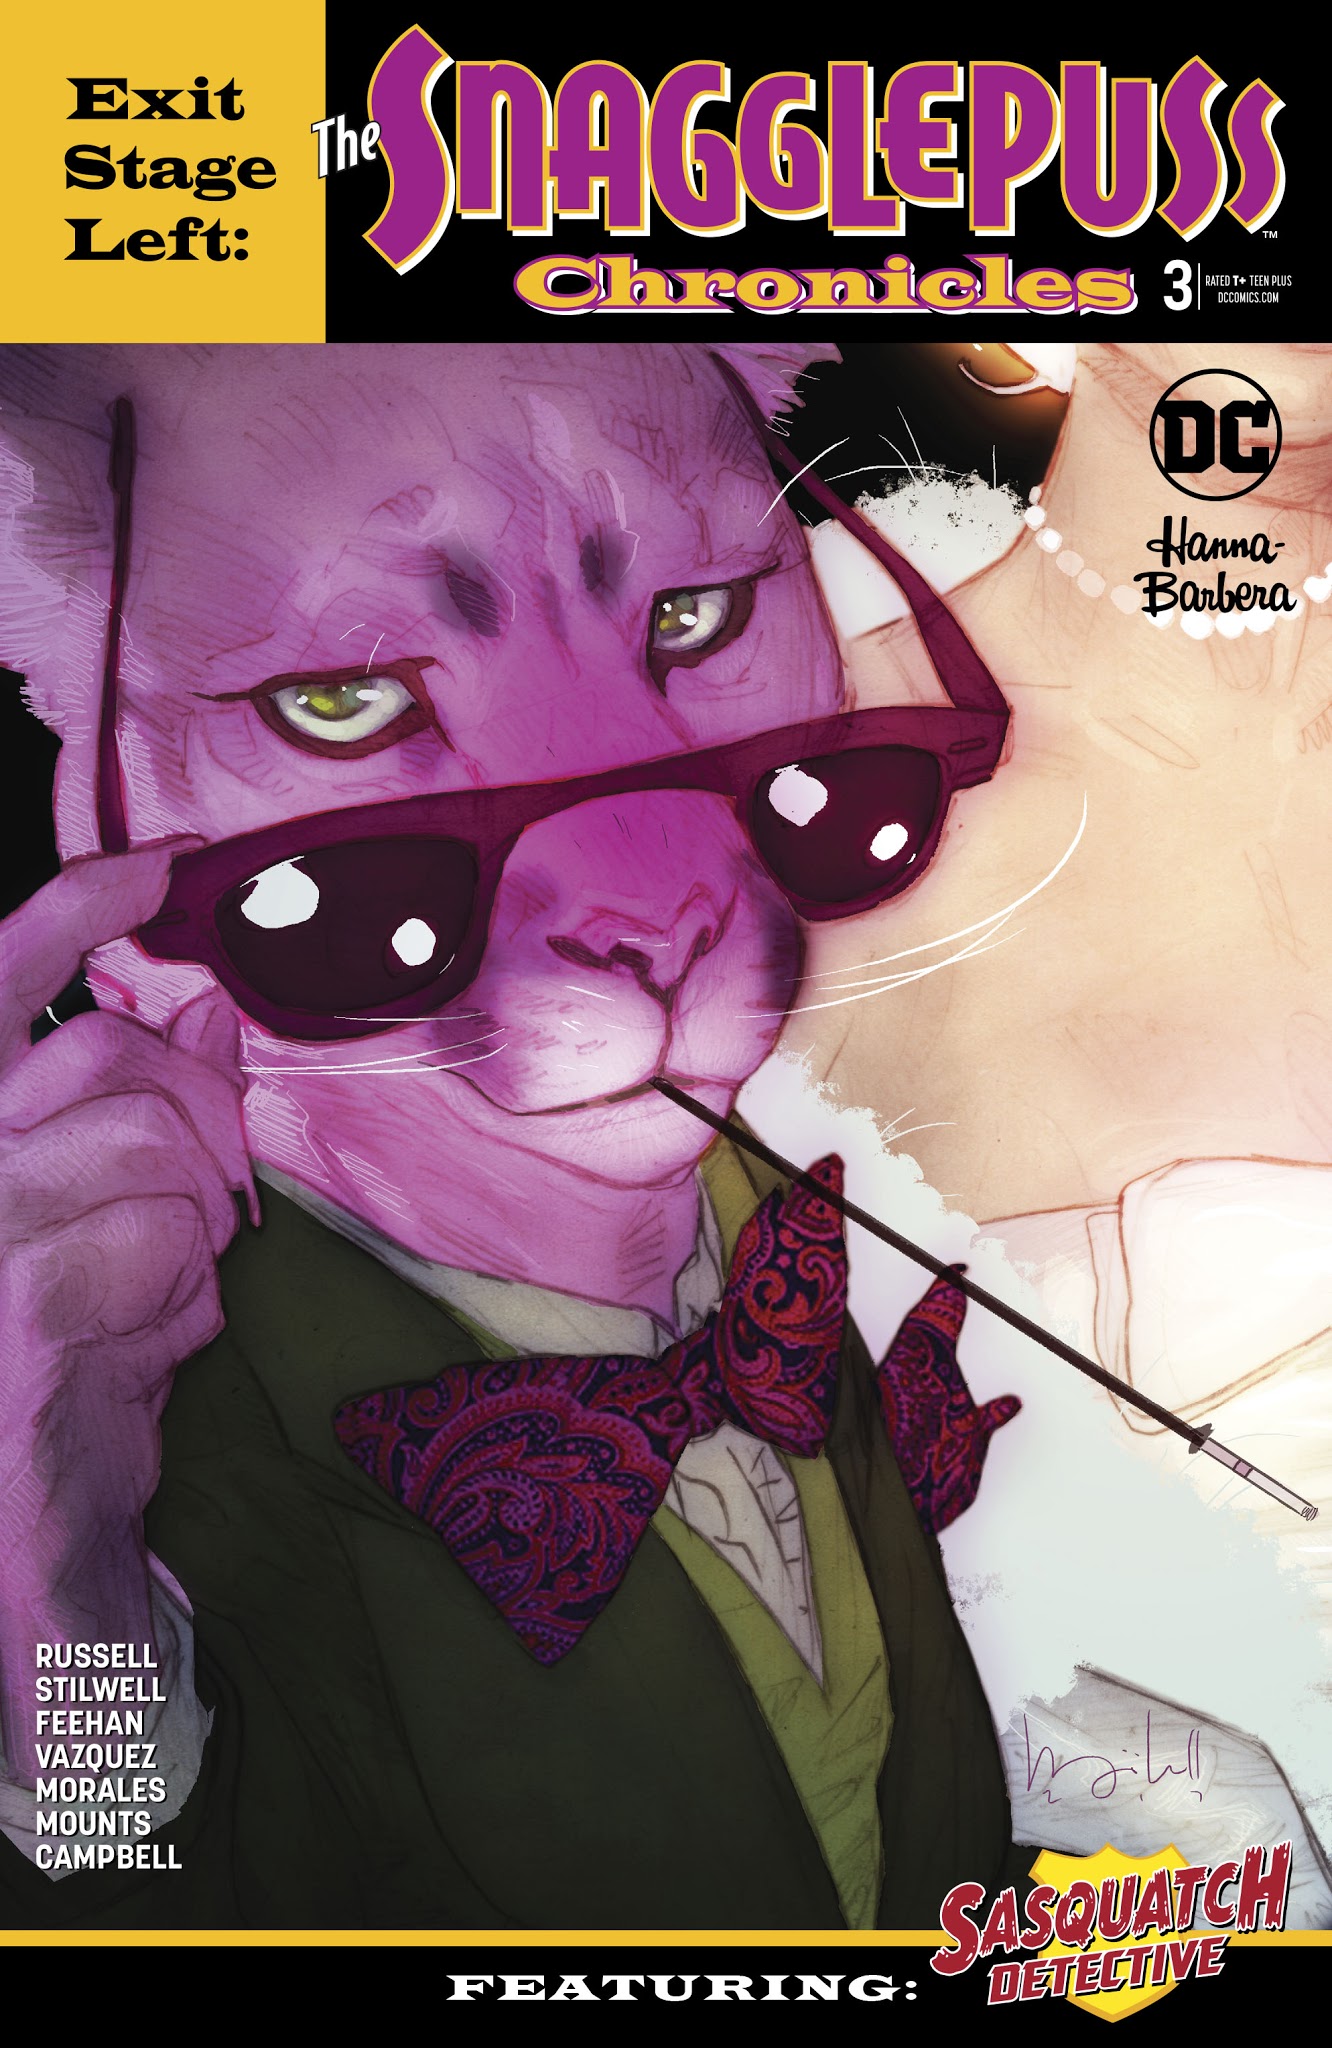 Exit Stage Left: The Snagglepuss Chronicles issue 3 - Page 1